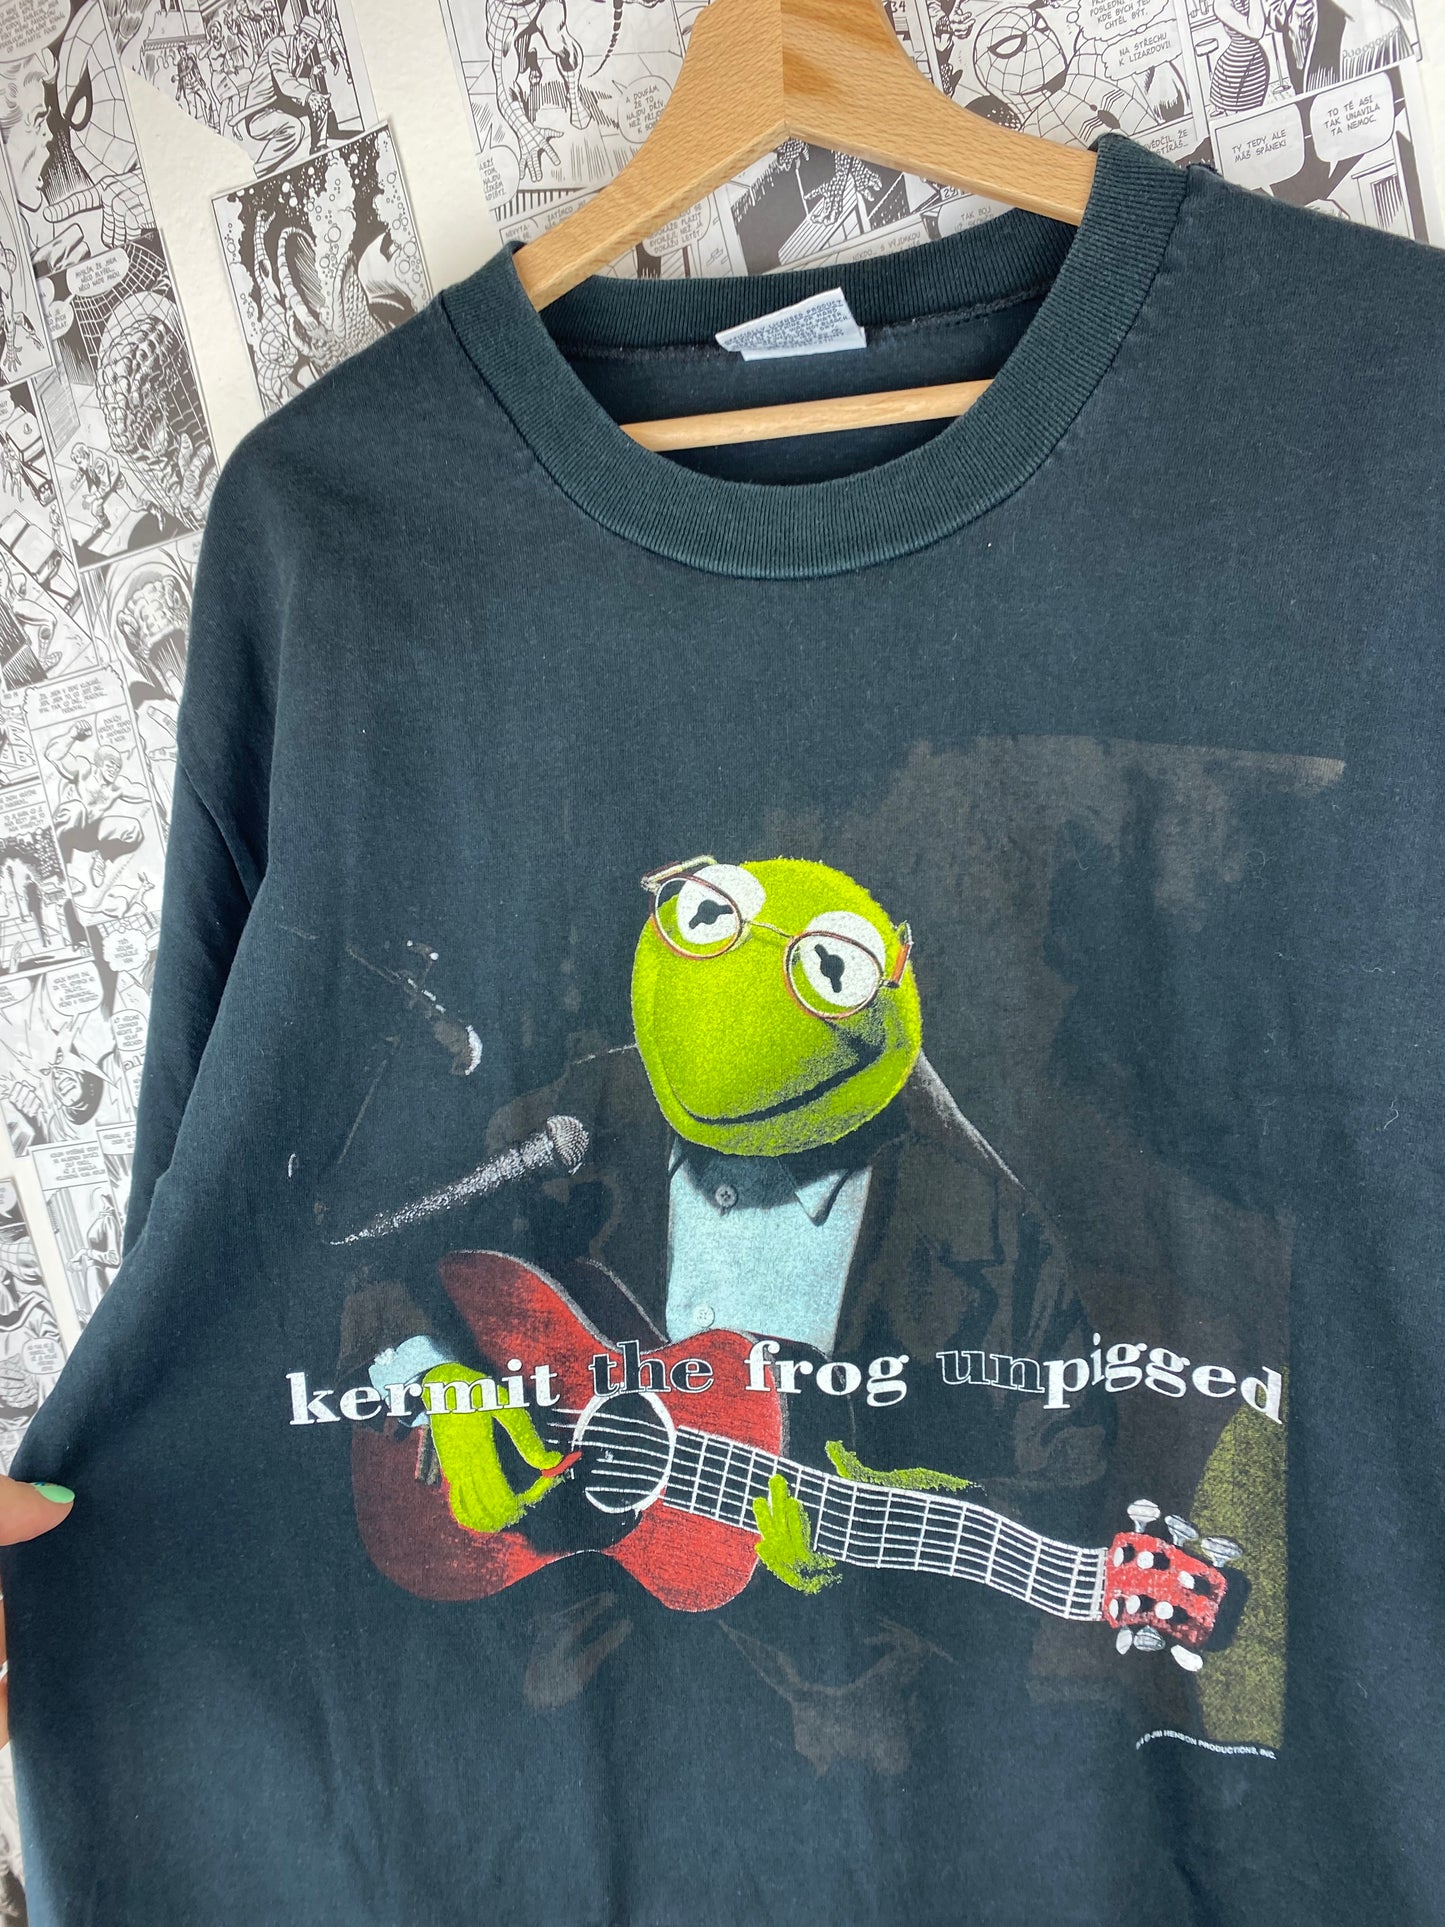 Vintage Muppets - Kermit the frog 80s/90s t-shirt - size XL